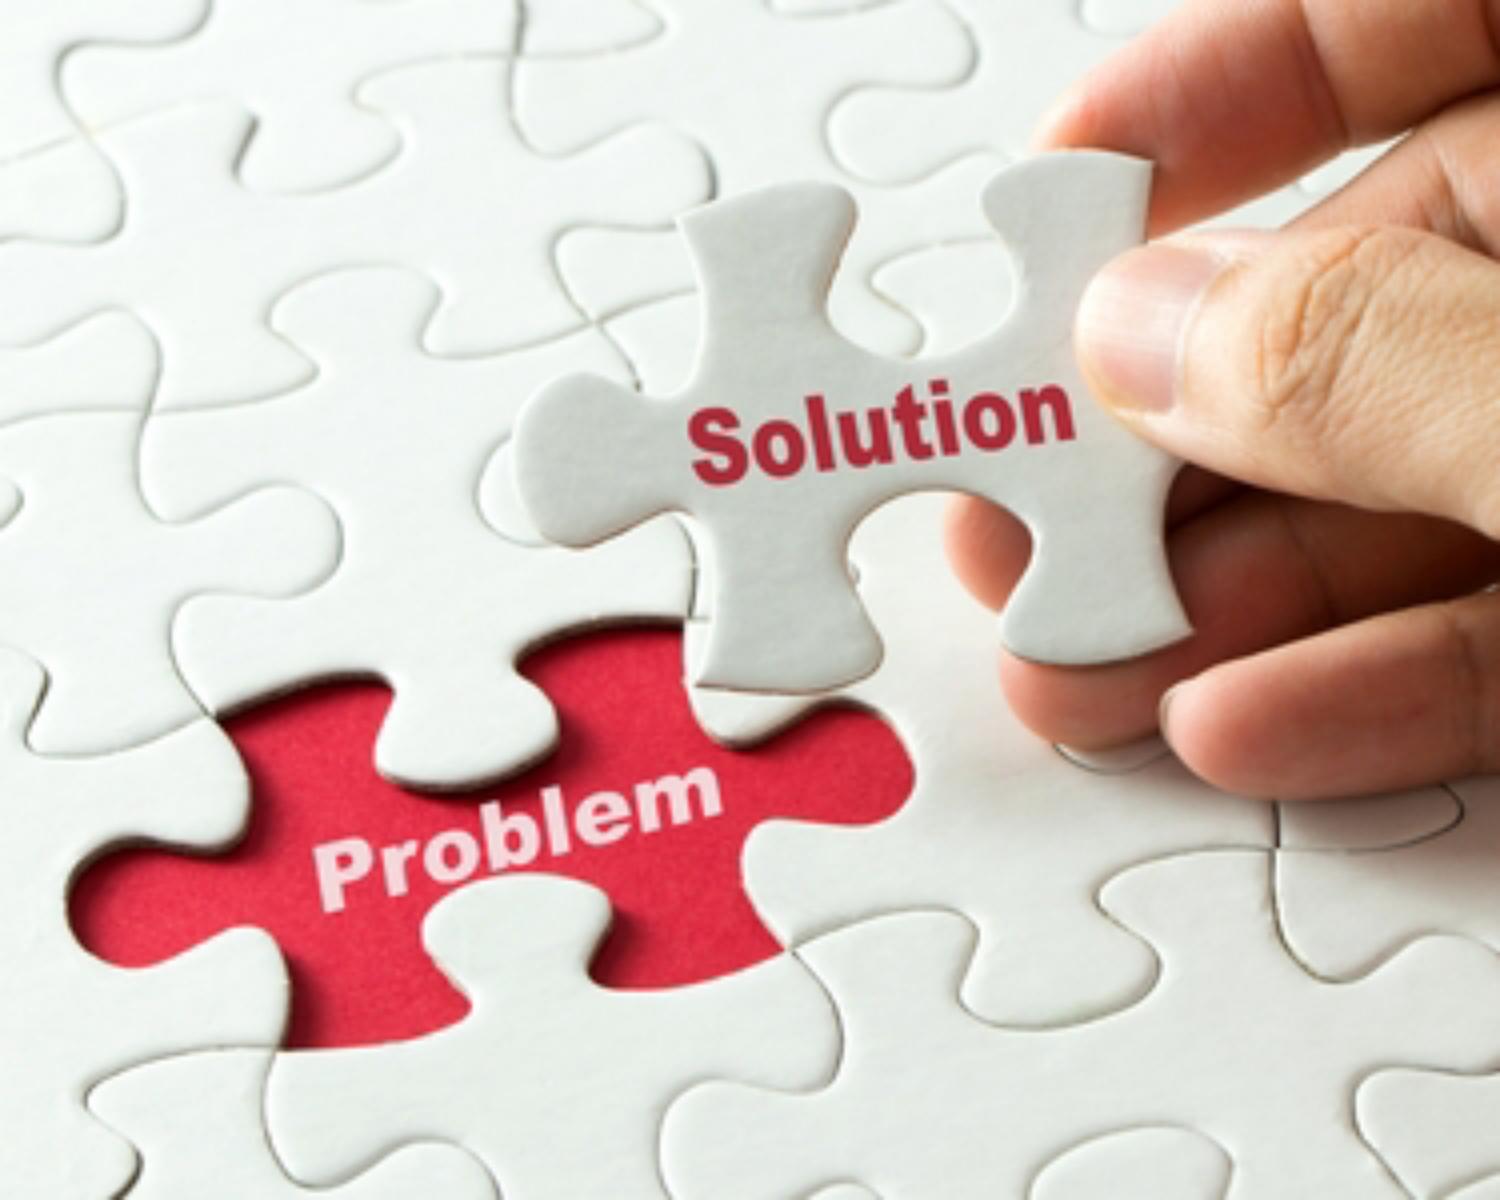 7 Steps To Become An Effective Problem Solver